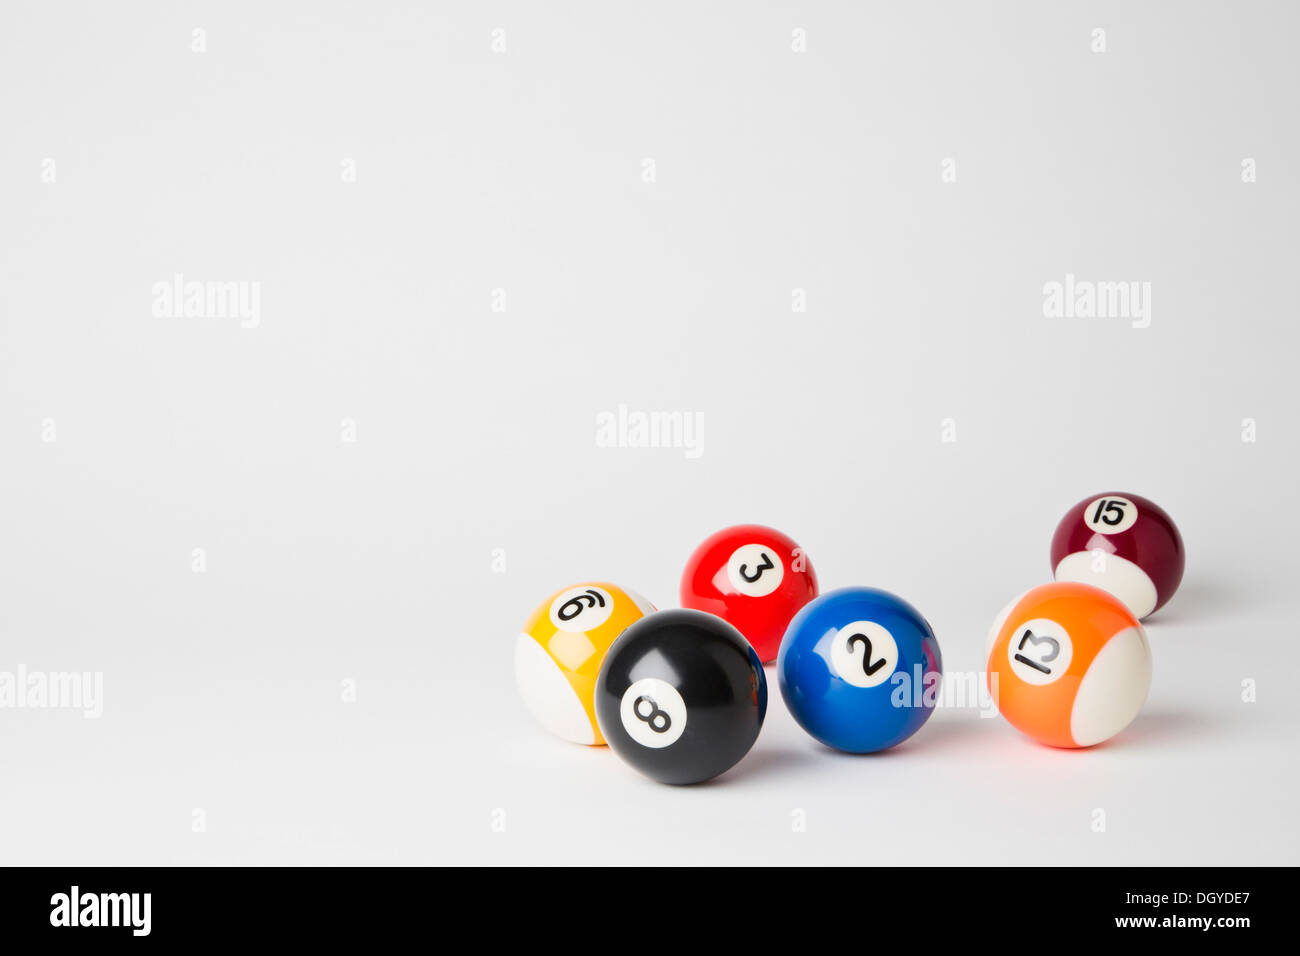 Six pool balls, including the eight ball, on a white surface Stock Photo